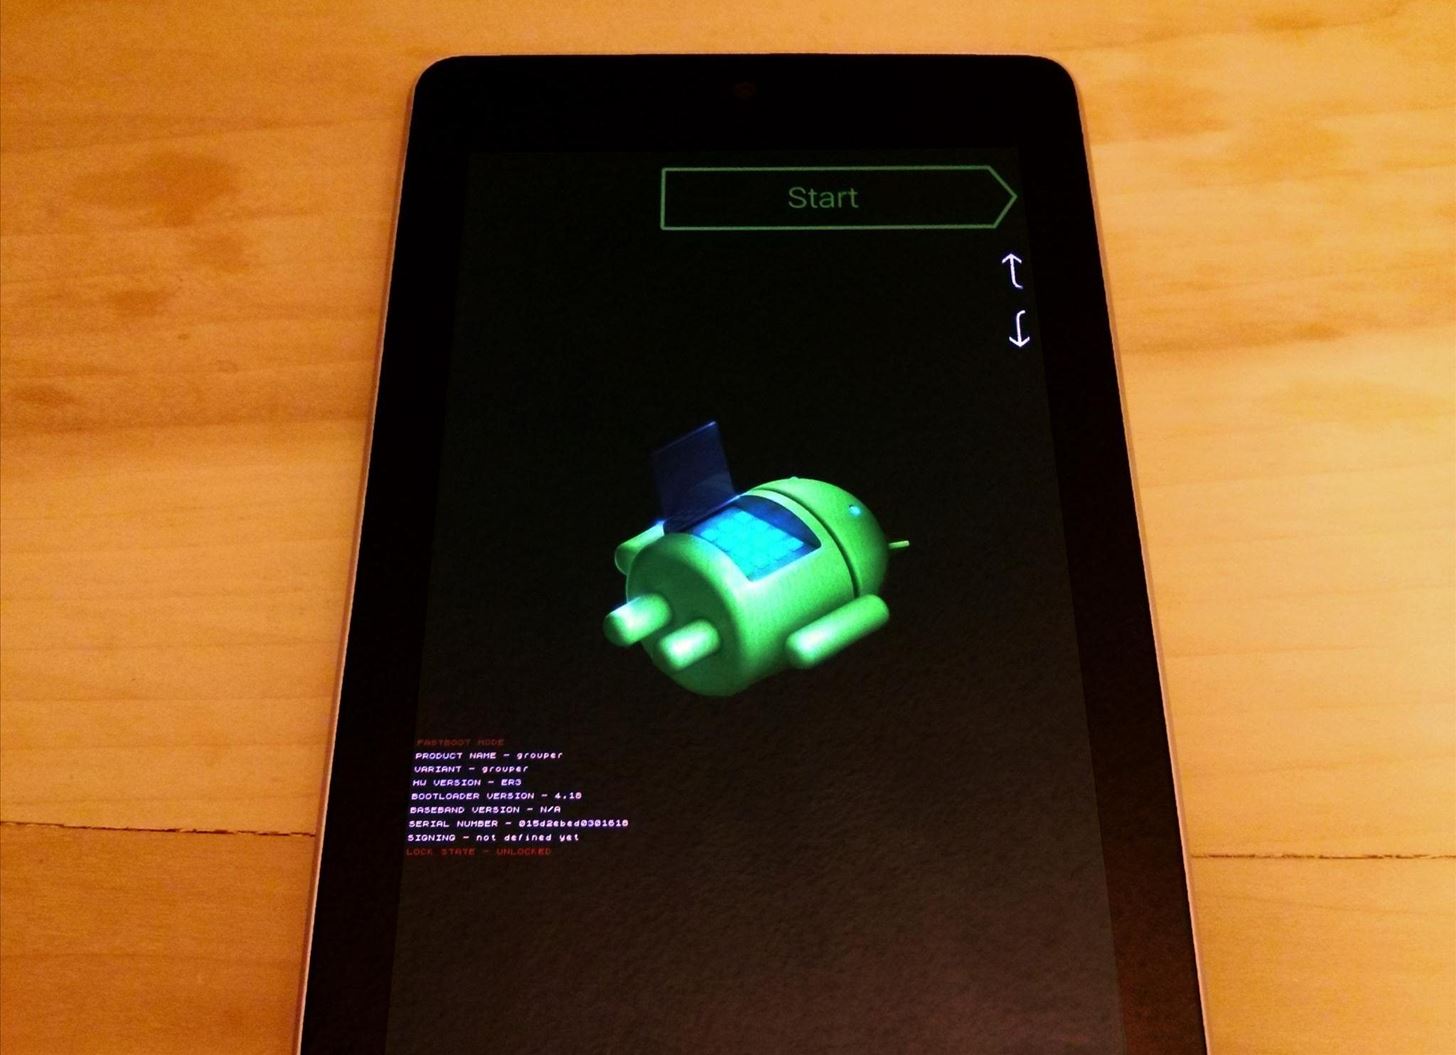 The Definitive Guide on How to Restore Your Nexus 7 Tablet (Even if You've Bricked It)